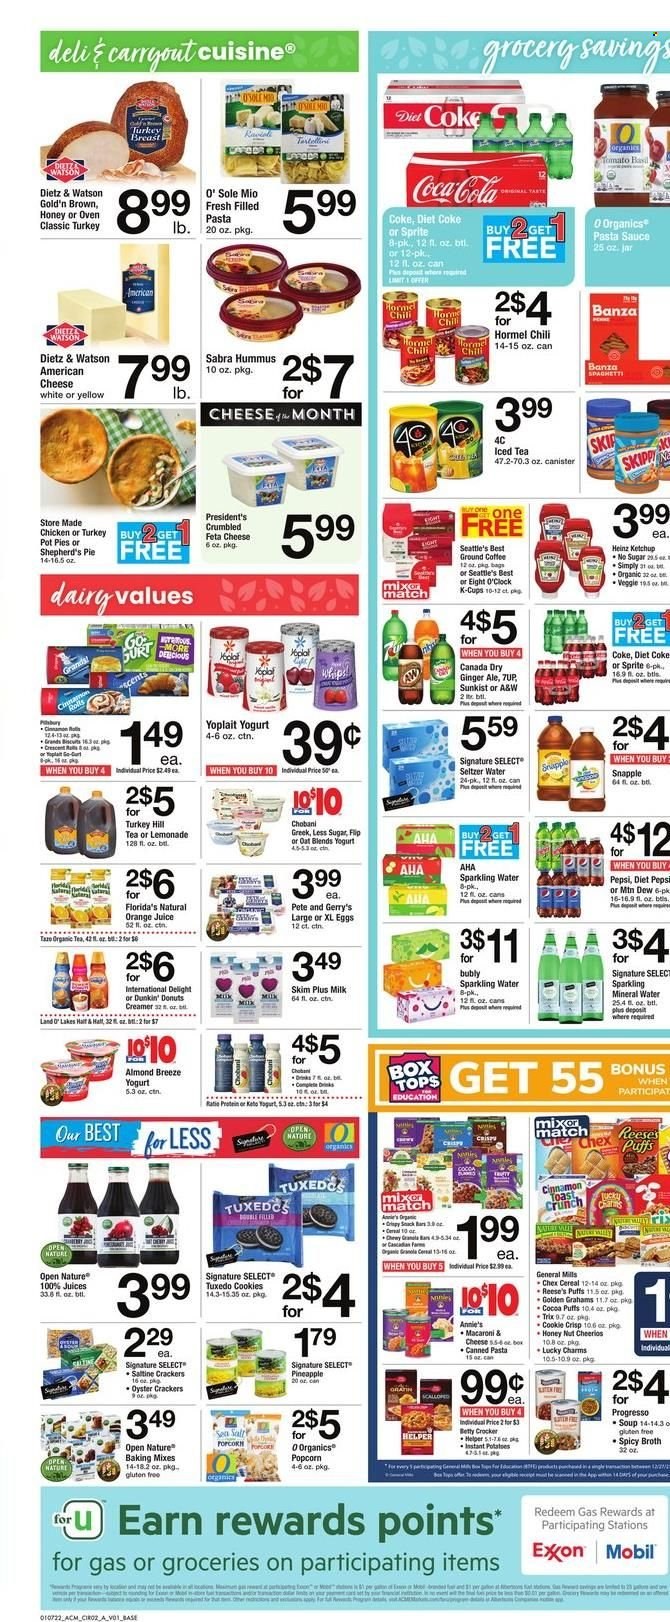 thumbnail - ACME Flyer - 01/07/2022 - 01/13/2022 - Sales products - pie, pot pie, puffs, donut, Dunkin' Donuts, potatoes, pineapple, oysters, spaghetti, pasta sauce, soup, Progresso, Annie's, Hormel, filled pasta, Dietz & Watson, hummus, american cheese, Président, feta, yoghurt, Yoplait, Chobani, milk, Almond Breeze, eggs, creamer, Reese's, cookies, crackers, Florida's Natural, popcorn, cocoa, broth, oyster crackers, Heinz, cereals, Cheerios, Trix, toor dal, esponja, ketchup, Canada Dry, Coca-Cola, ginger ale, lemonade, Mountain Dew, Sprite, Pepsi, orange juice, juice, ice tea, Diet Pepsi, Diet Coke, 7UP, Snapple, A&W, mineral water, seltzer water, sparkling water, coffee, ground coffee, coffee capsules, K-Cups, Eight O'Clock, tops. Page 2.